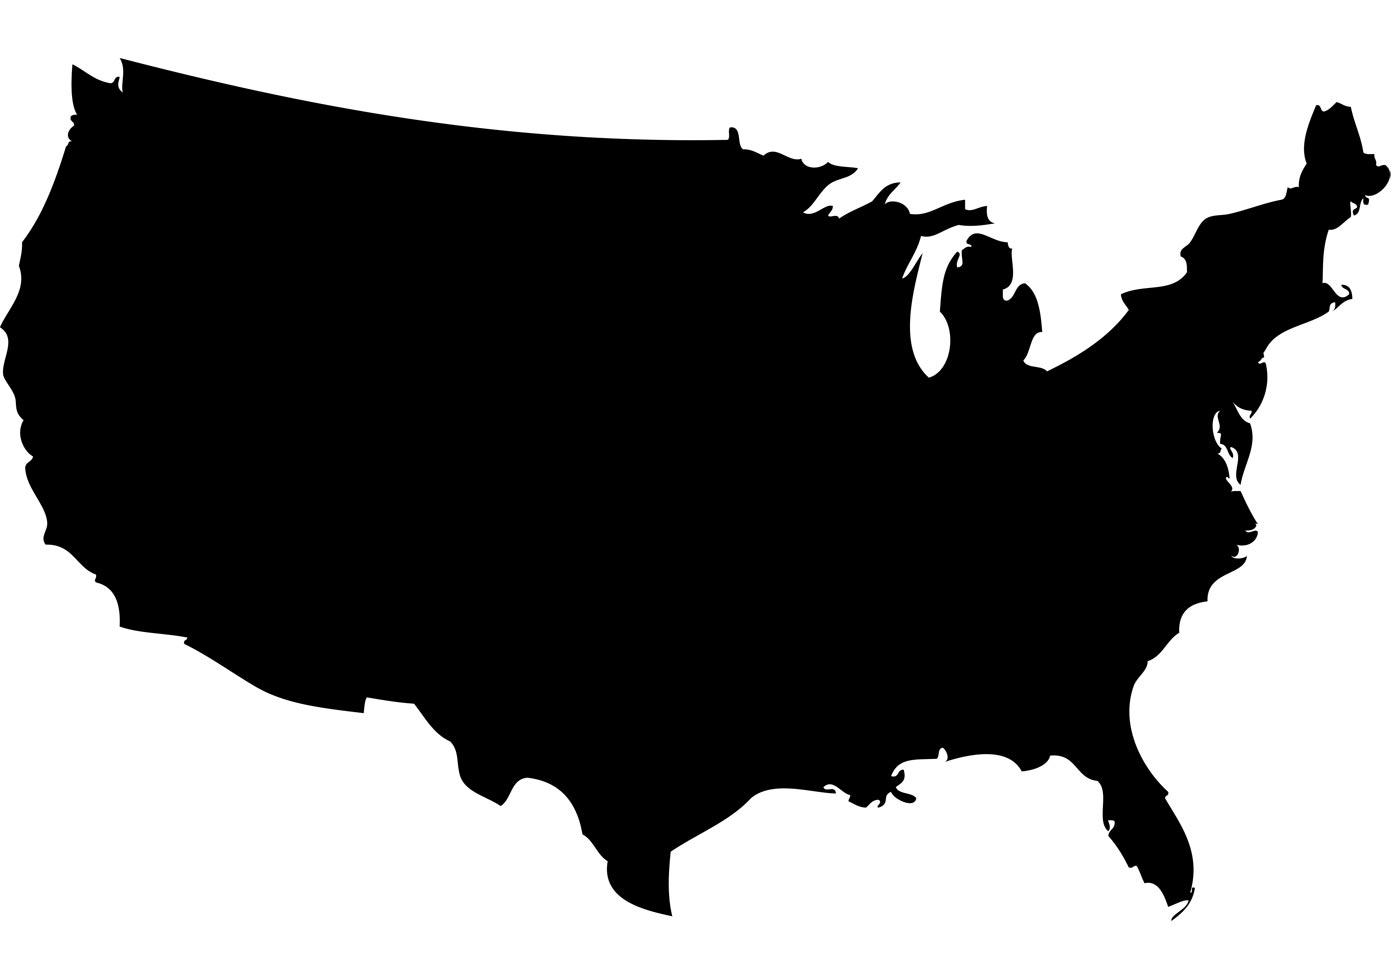 Free Vector Map of United States | Free Vector Art at Vecteezy!